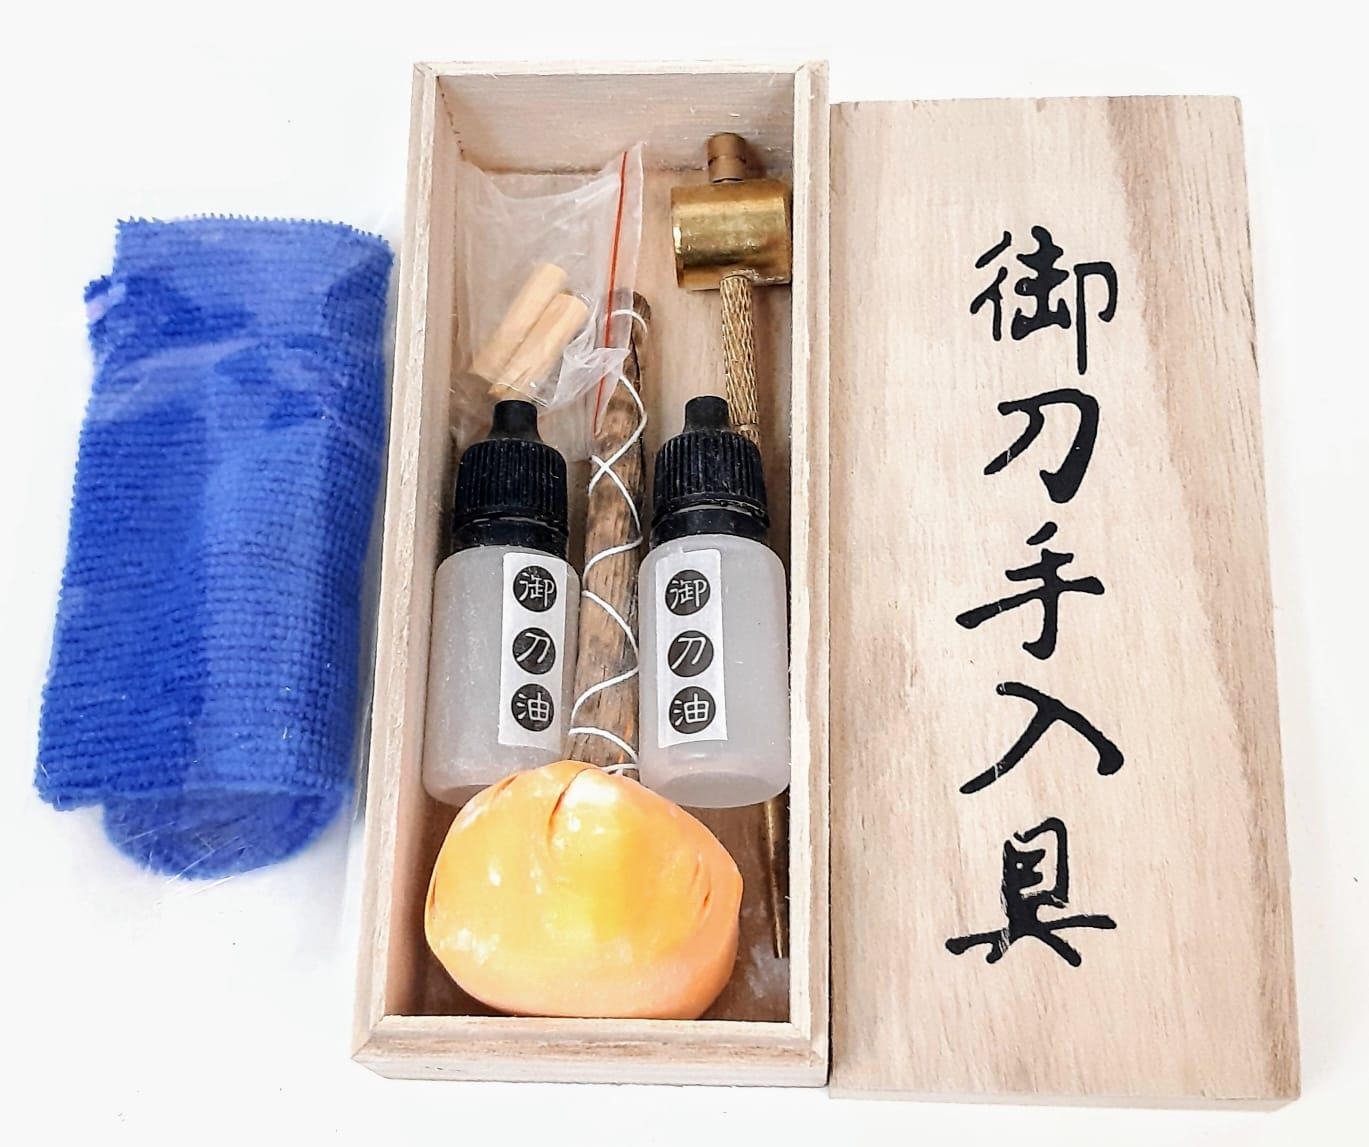 An Unused, Boxed, Japanese Katana Cleaning Set with Instructions - Image 2 of 2